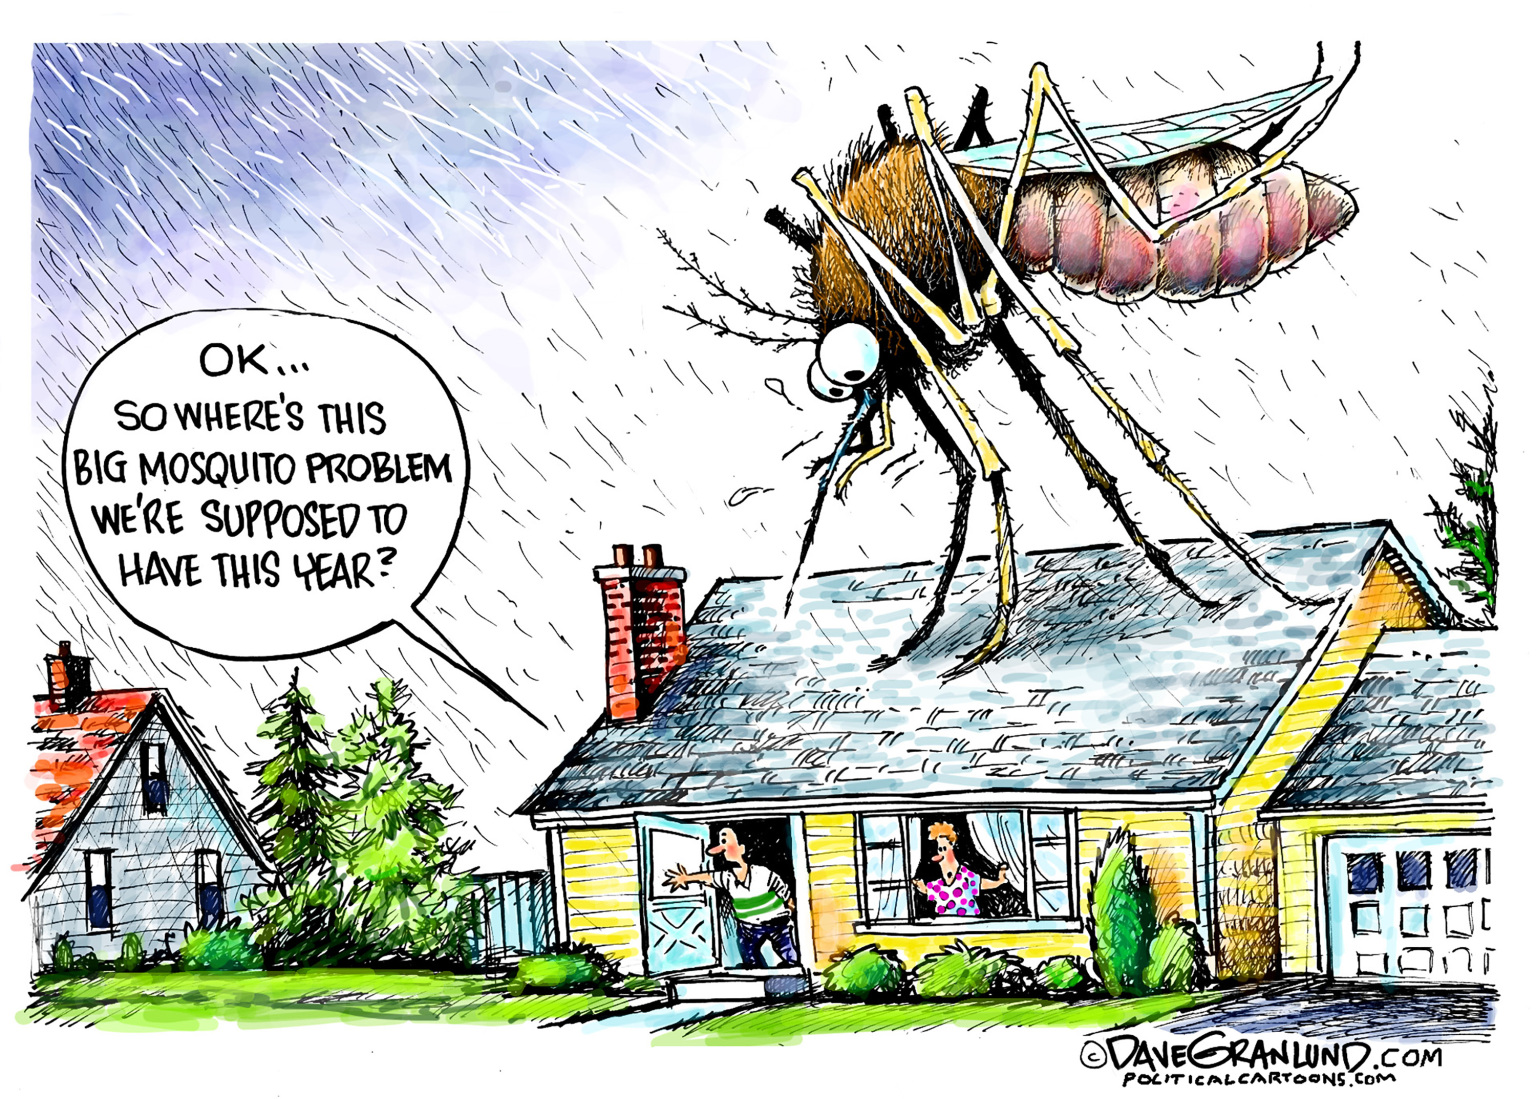 Big Mosquito Problem - By Dave Granlund